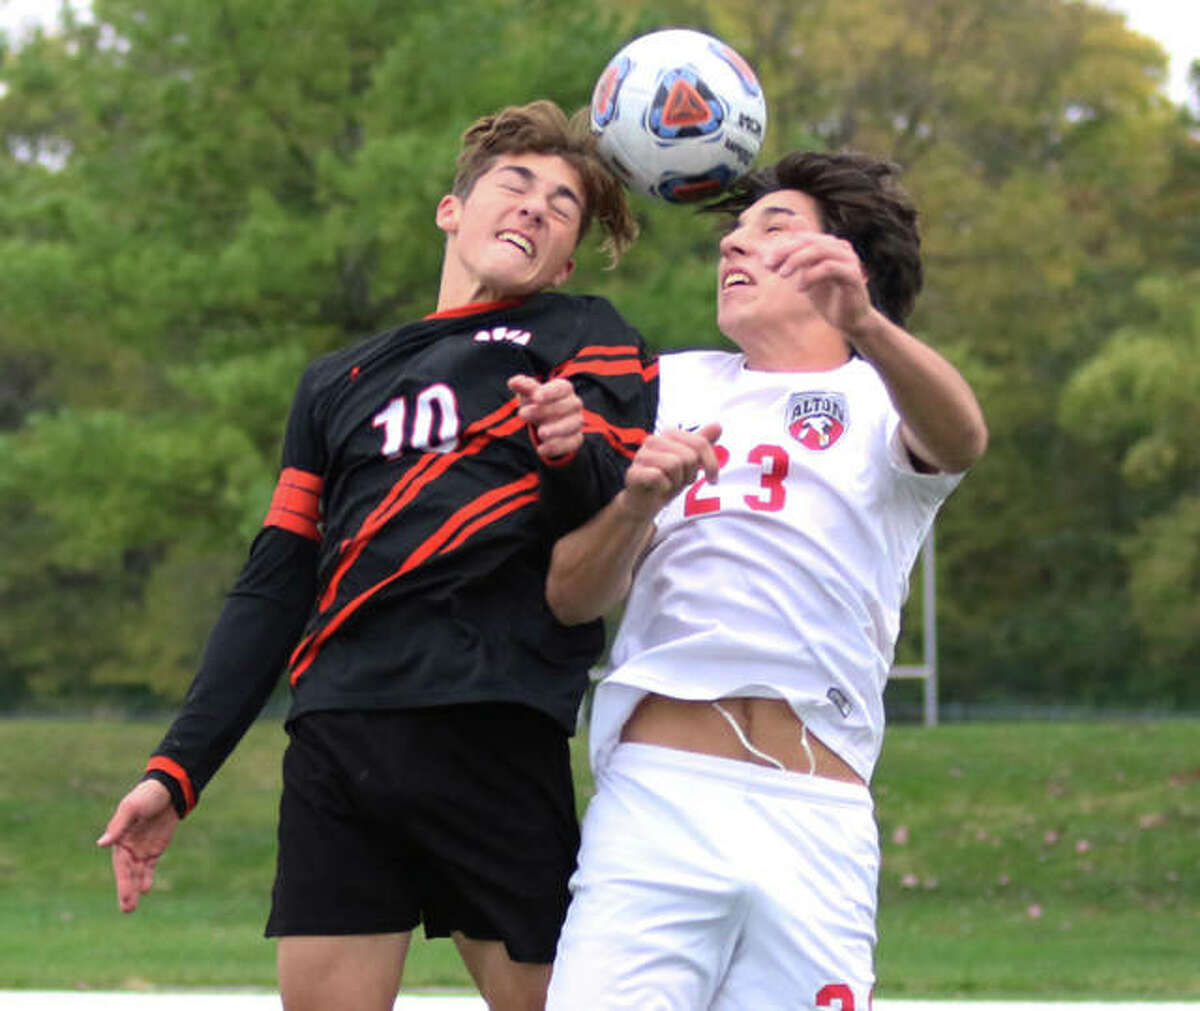 Alton’s Justin Davison (right) and Edwardsville’s Jakob Doyle vie for a headball near the Redbirds goal early in the Class 3A regional title match Friday in Edwardsville.